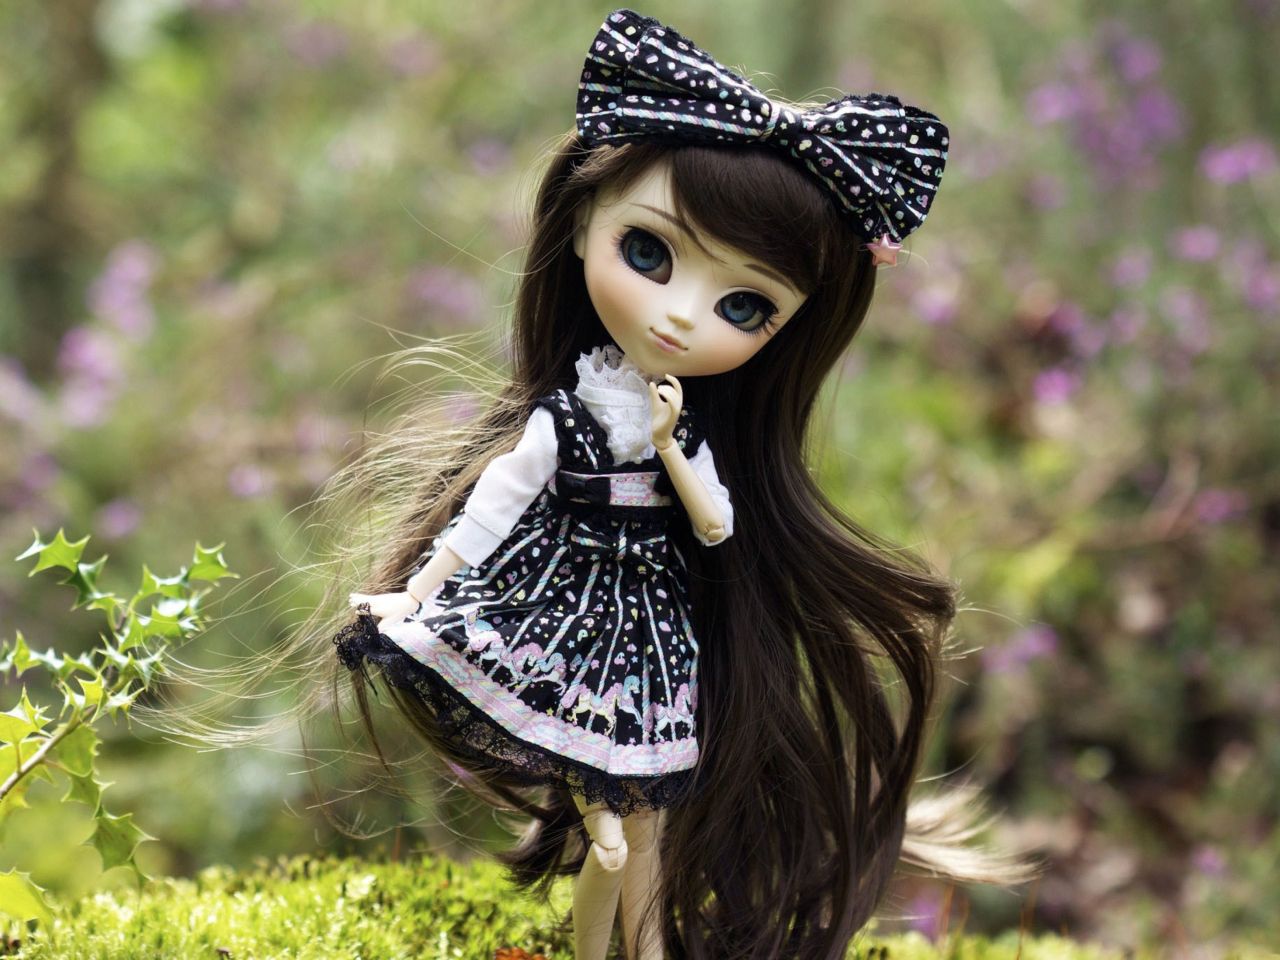 Cute Doll With Dark Hair And Black Bow Wallpaper For Cute Doll Dp, Download Wallpaper